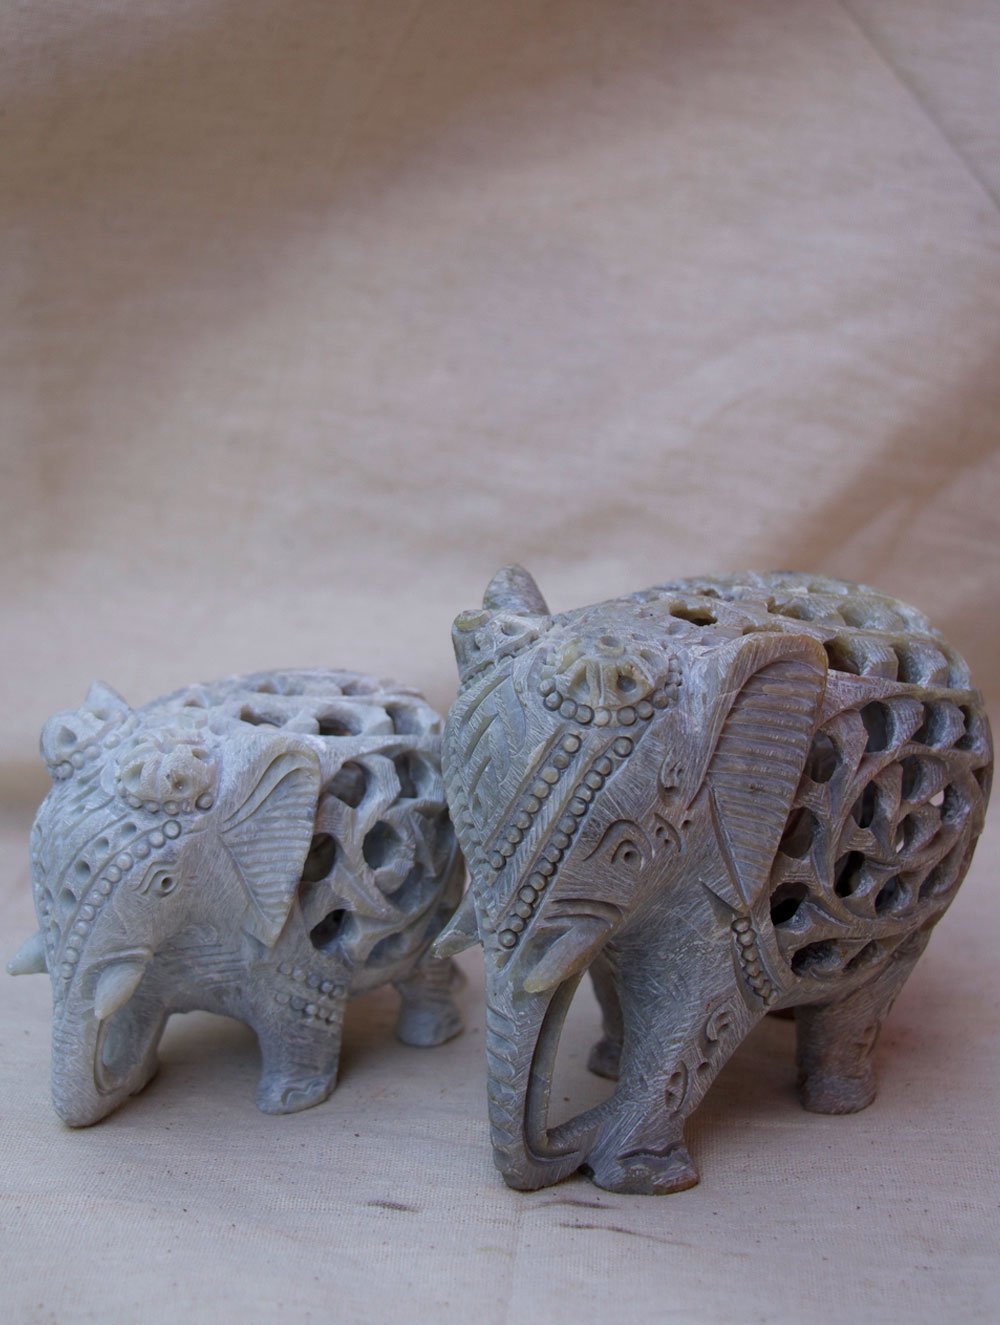 Load image into Gallery viewer, Carved Filigree Stone Elephant Curio Set of 2